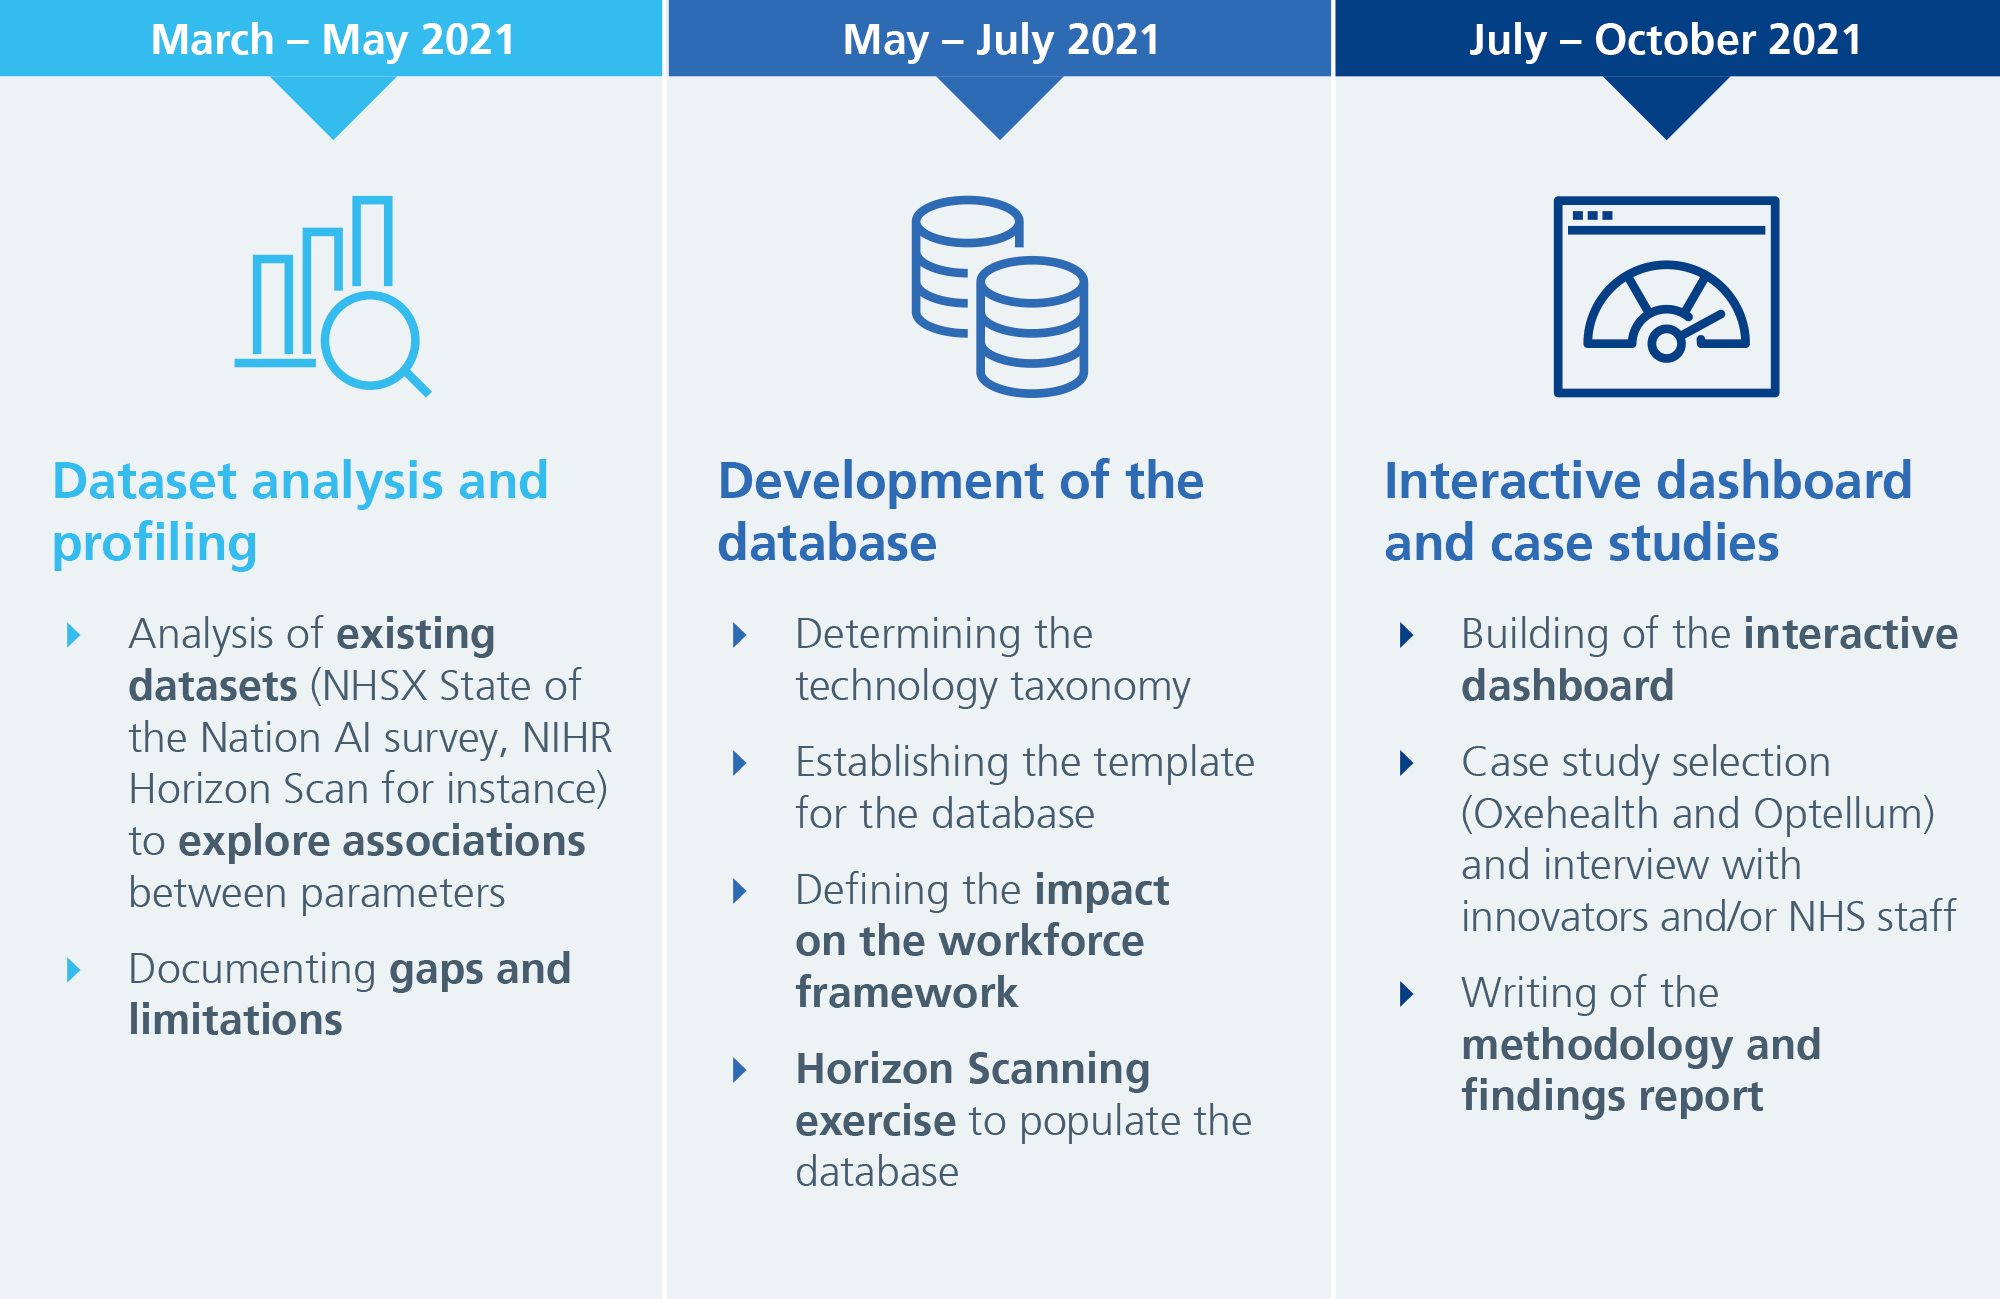 Detail on the main activities and deliverables of the commission